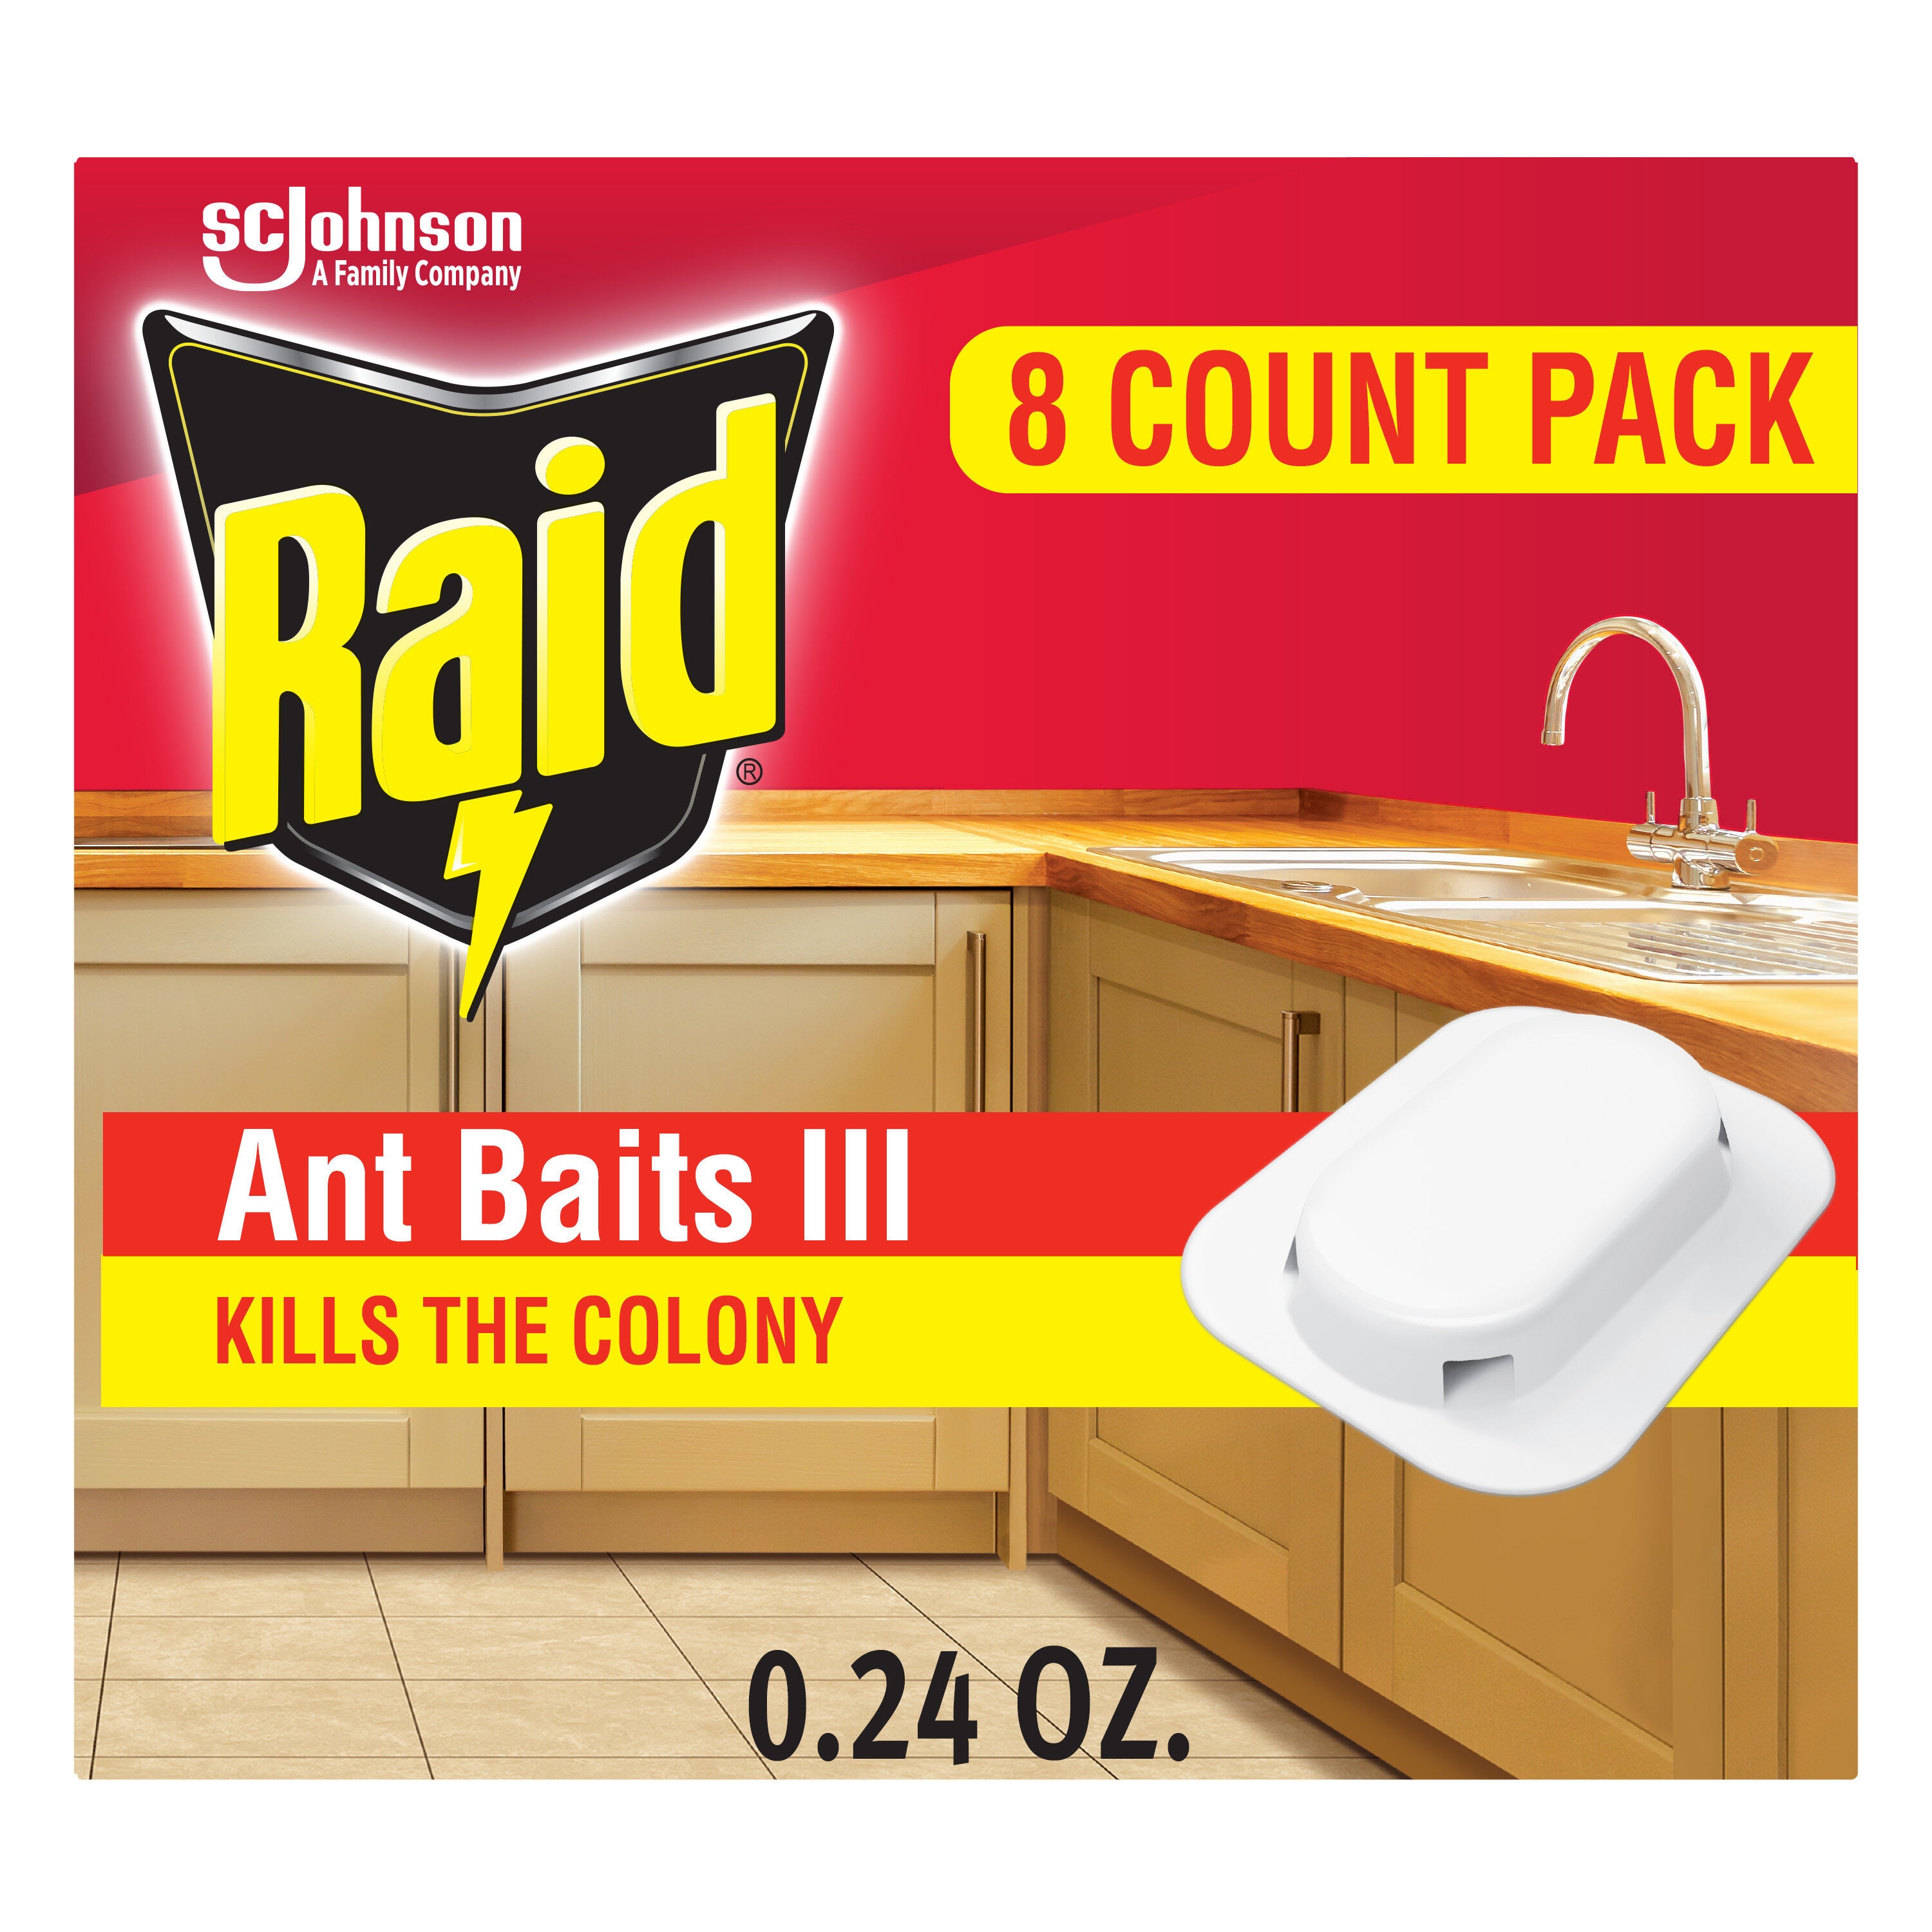 Raid Window Fly Trap, 4 Count (Pack of 6)